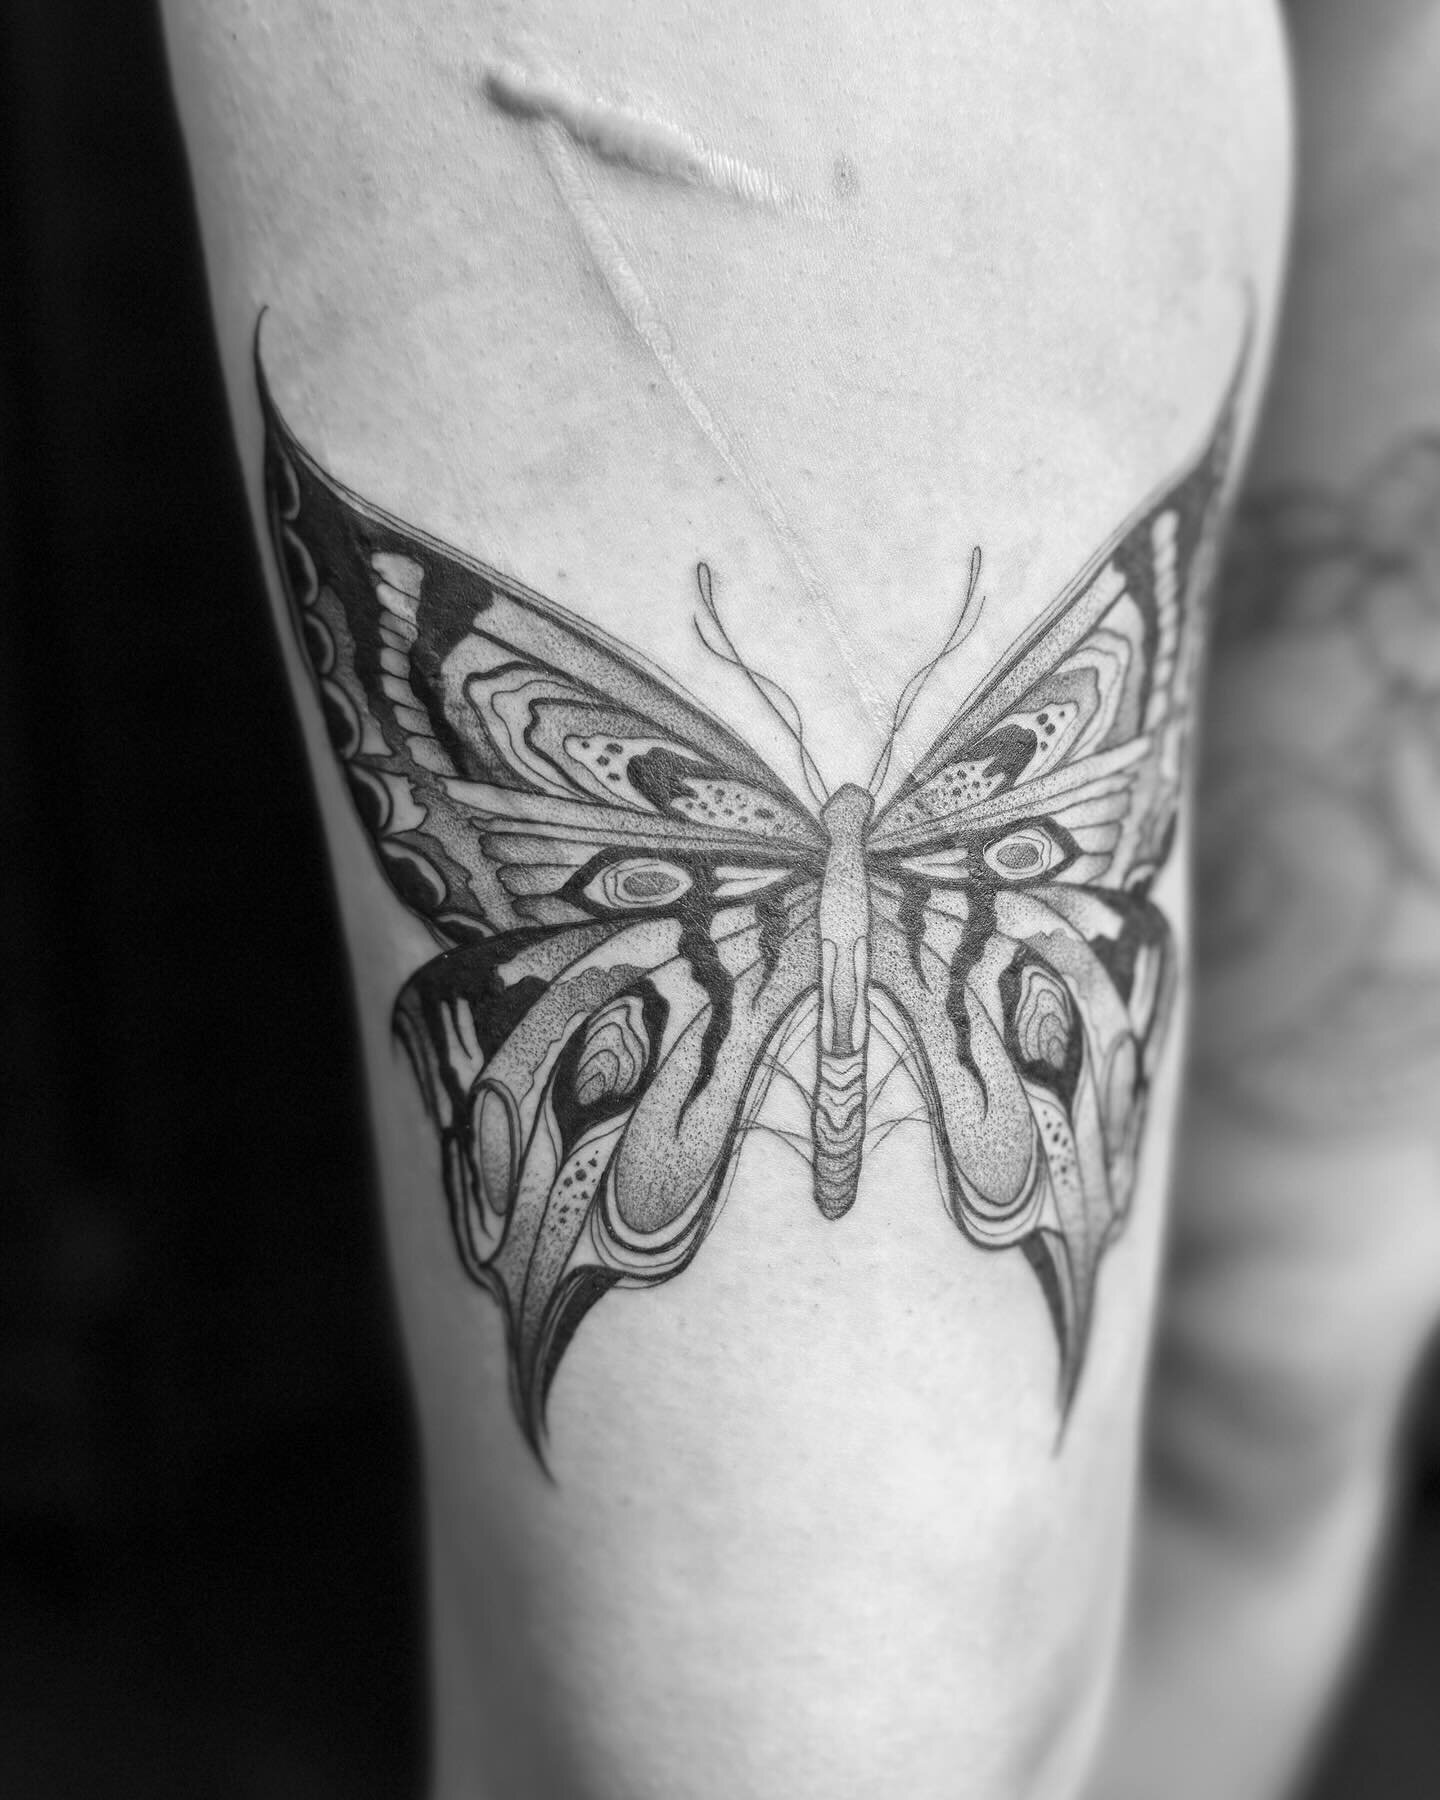 Moth Tattoo for @x.charlotte.x.02 great to have you in the studio! 
I&rsquo;m loving the blackwork style at the moment so give me a message to get something booked in 🤘
.
.
.
#tatt #tattoo #tattooideas #blxckwork #tattooartist #legtattoo #mothtattoo